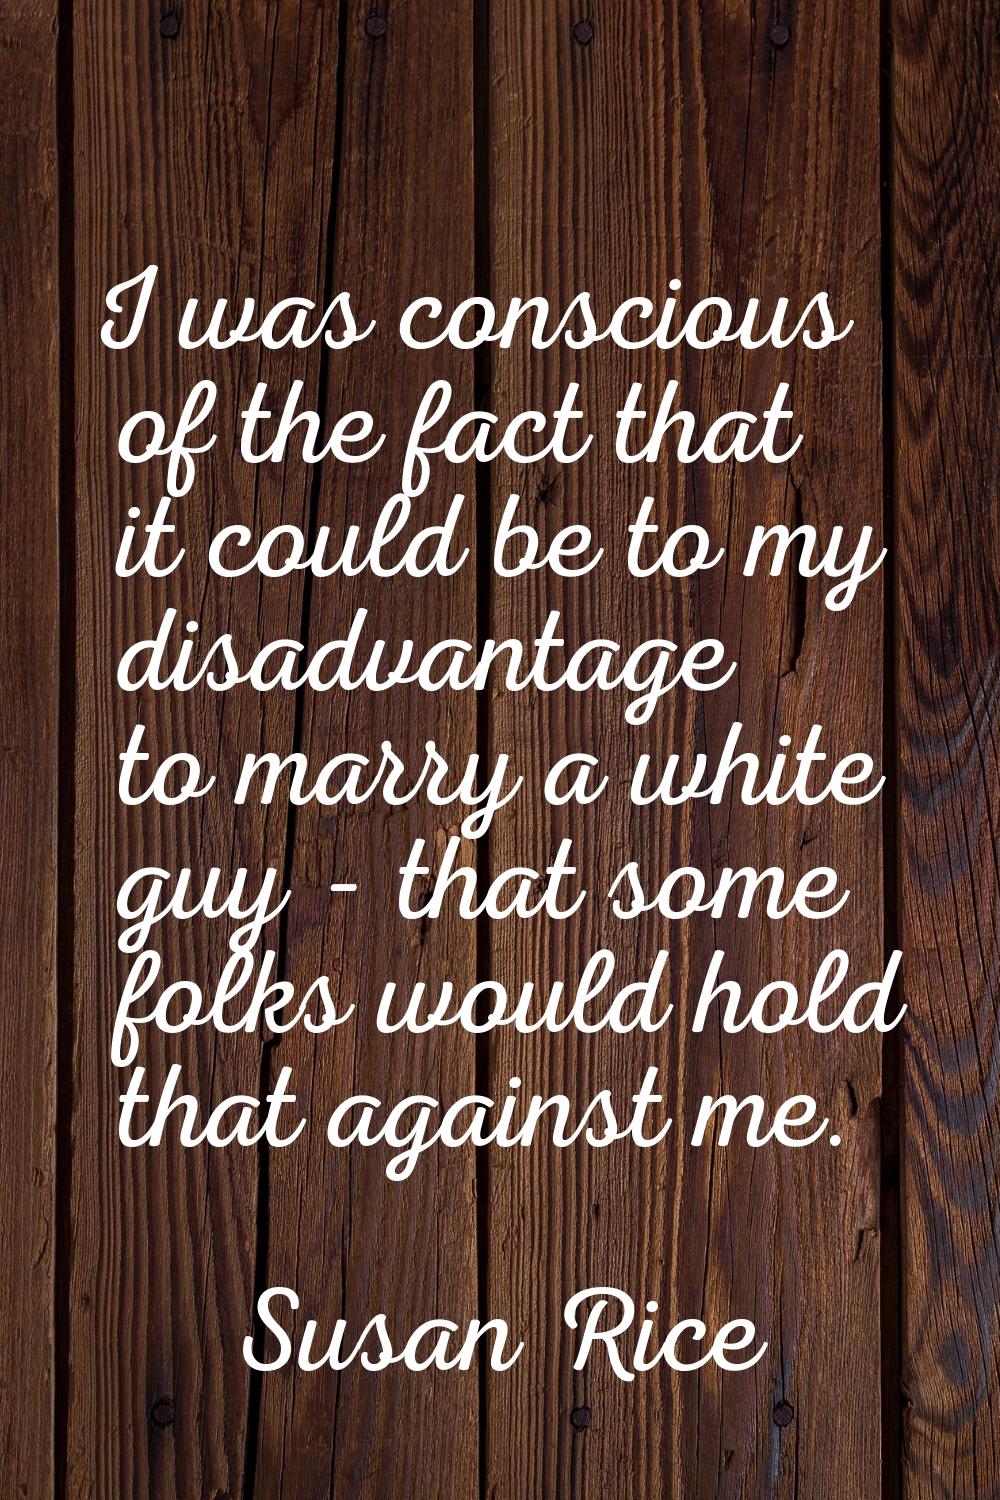 I was conscious of the fact that it could be to my disadvantage to marry a white guy - that some fo